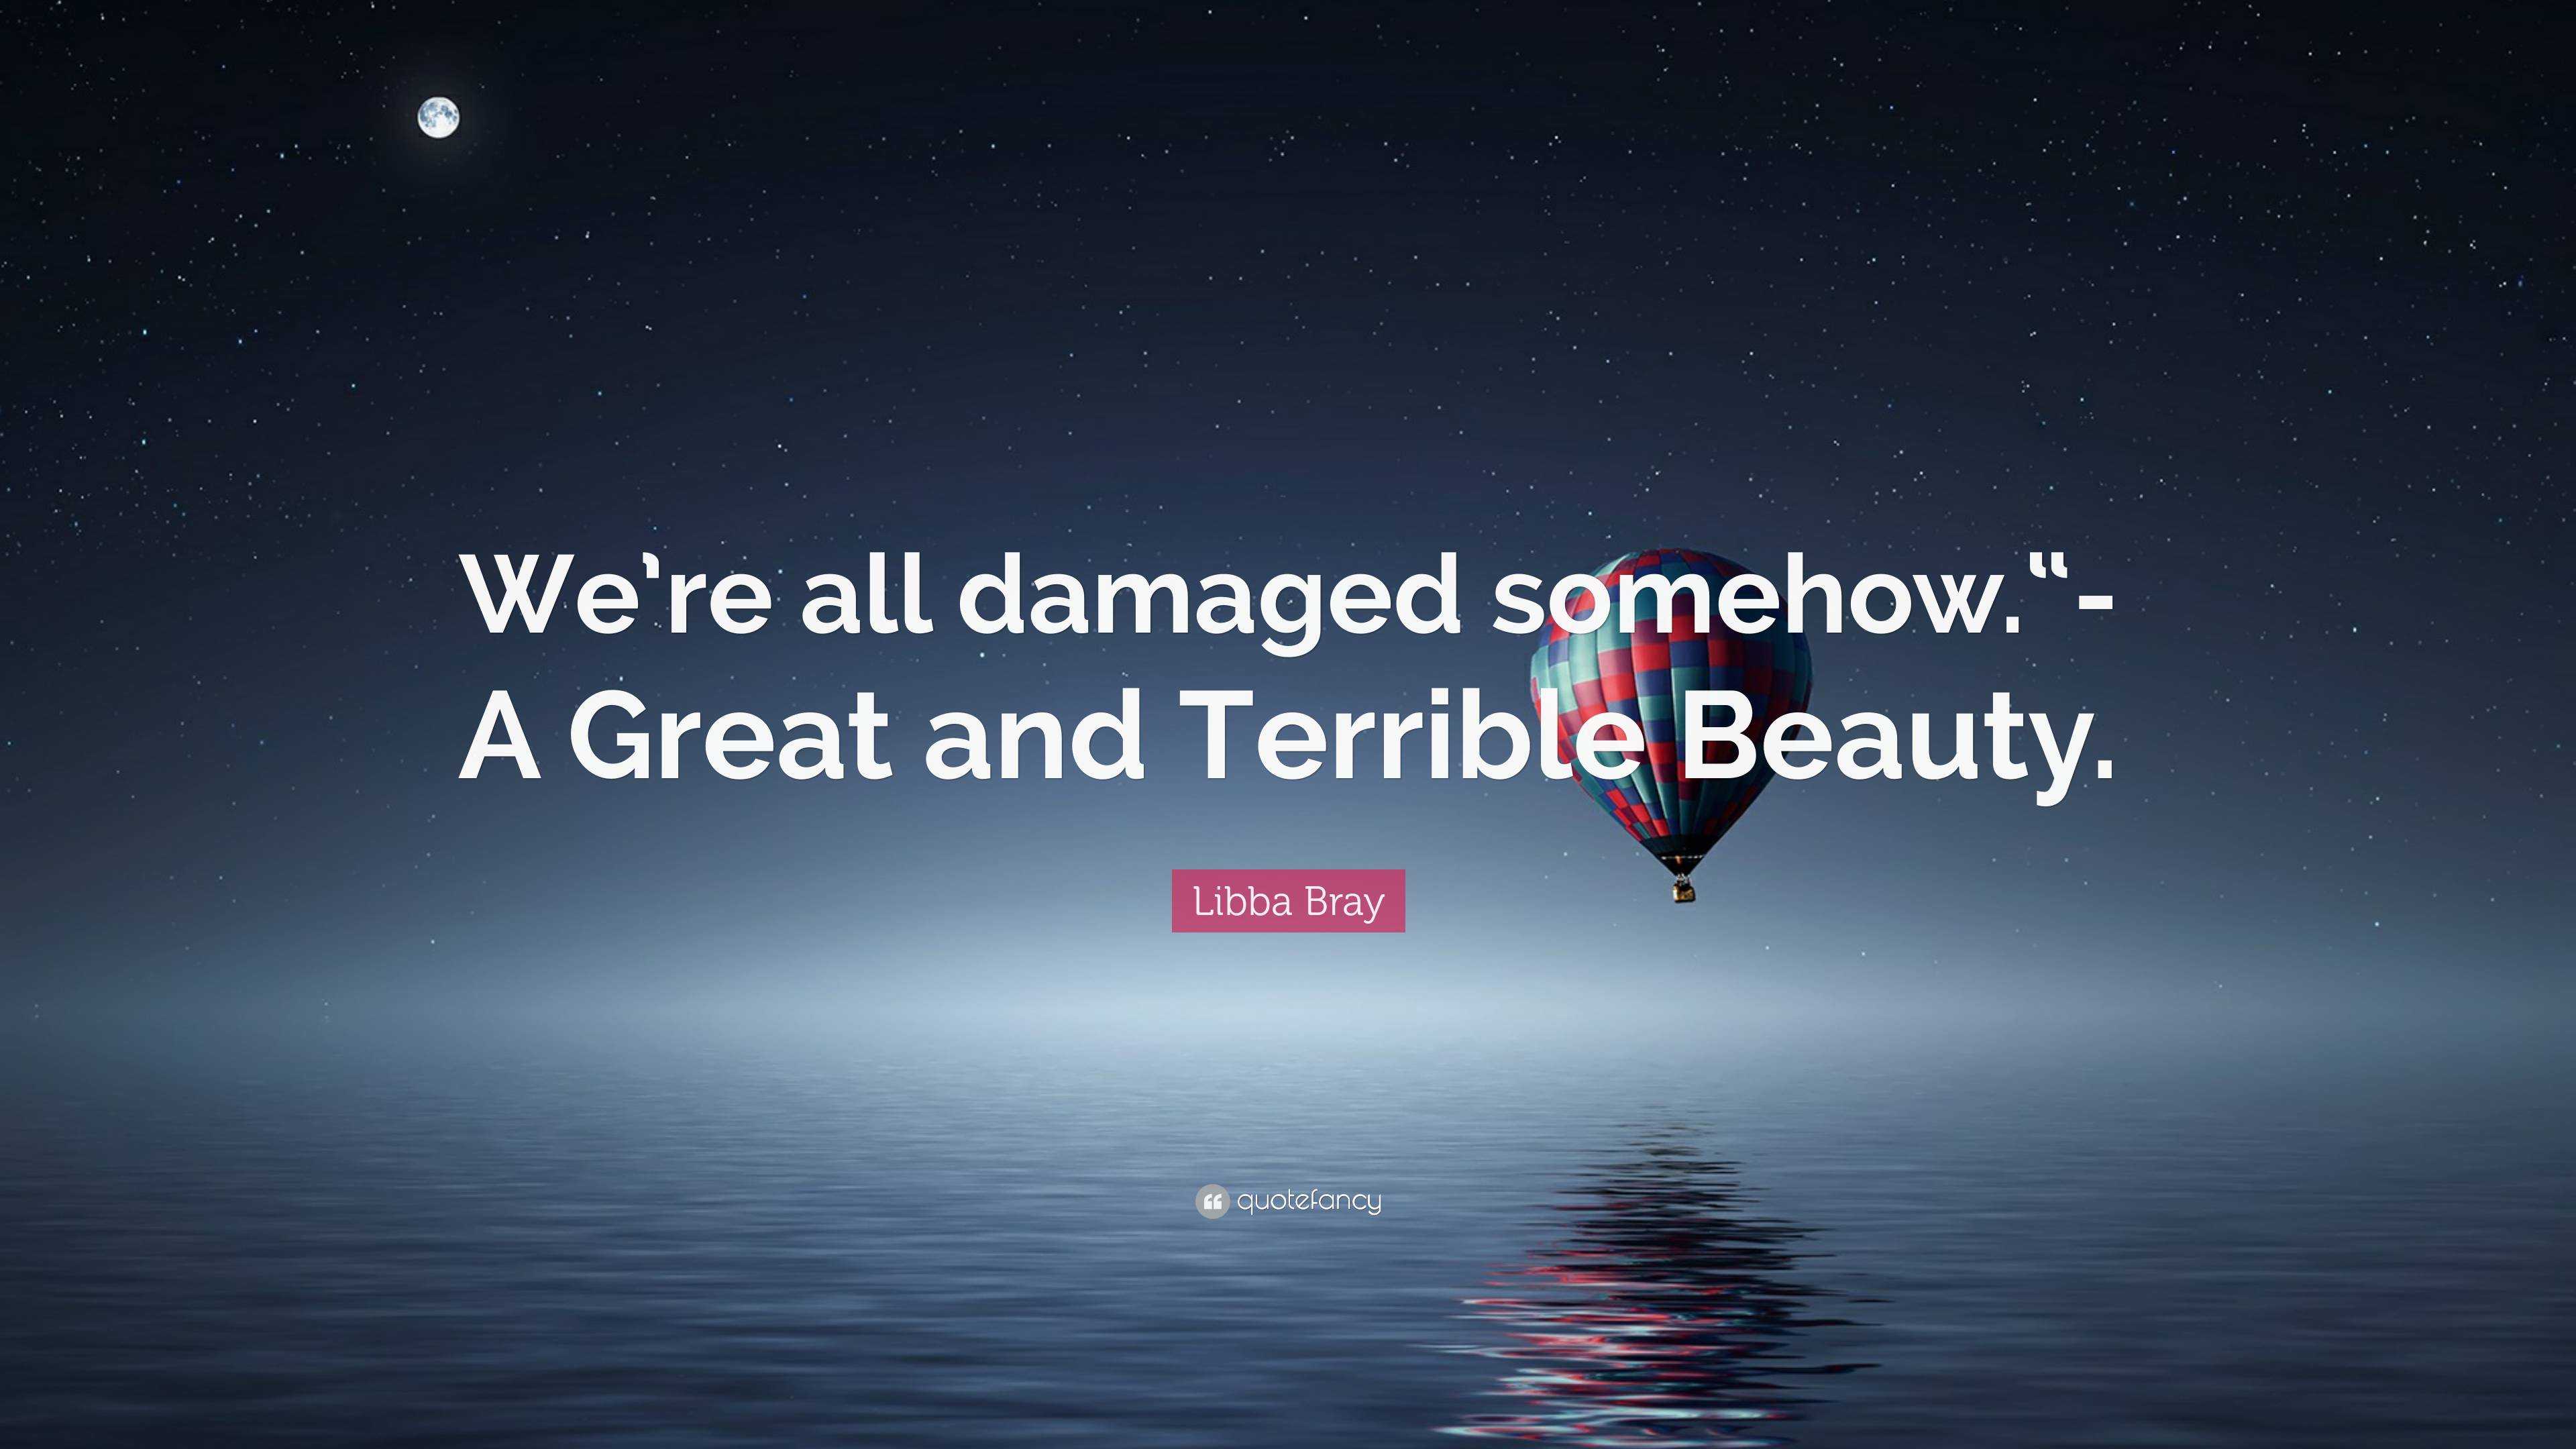 a great and terrible beauty by libba bray